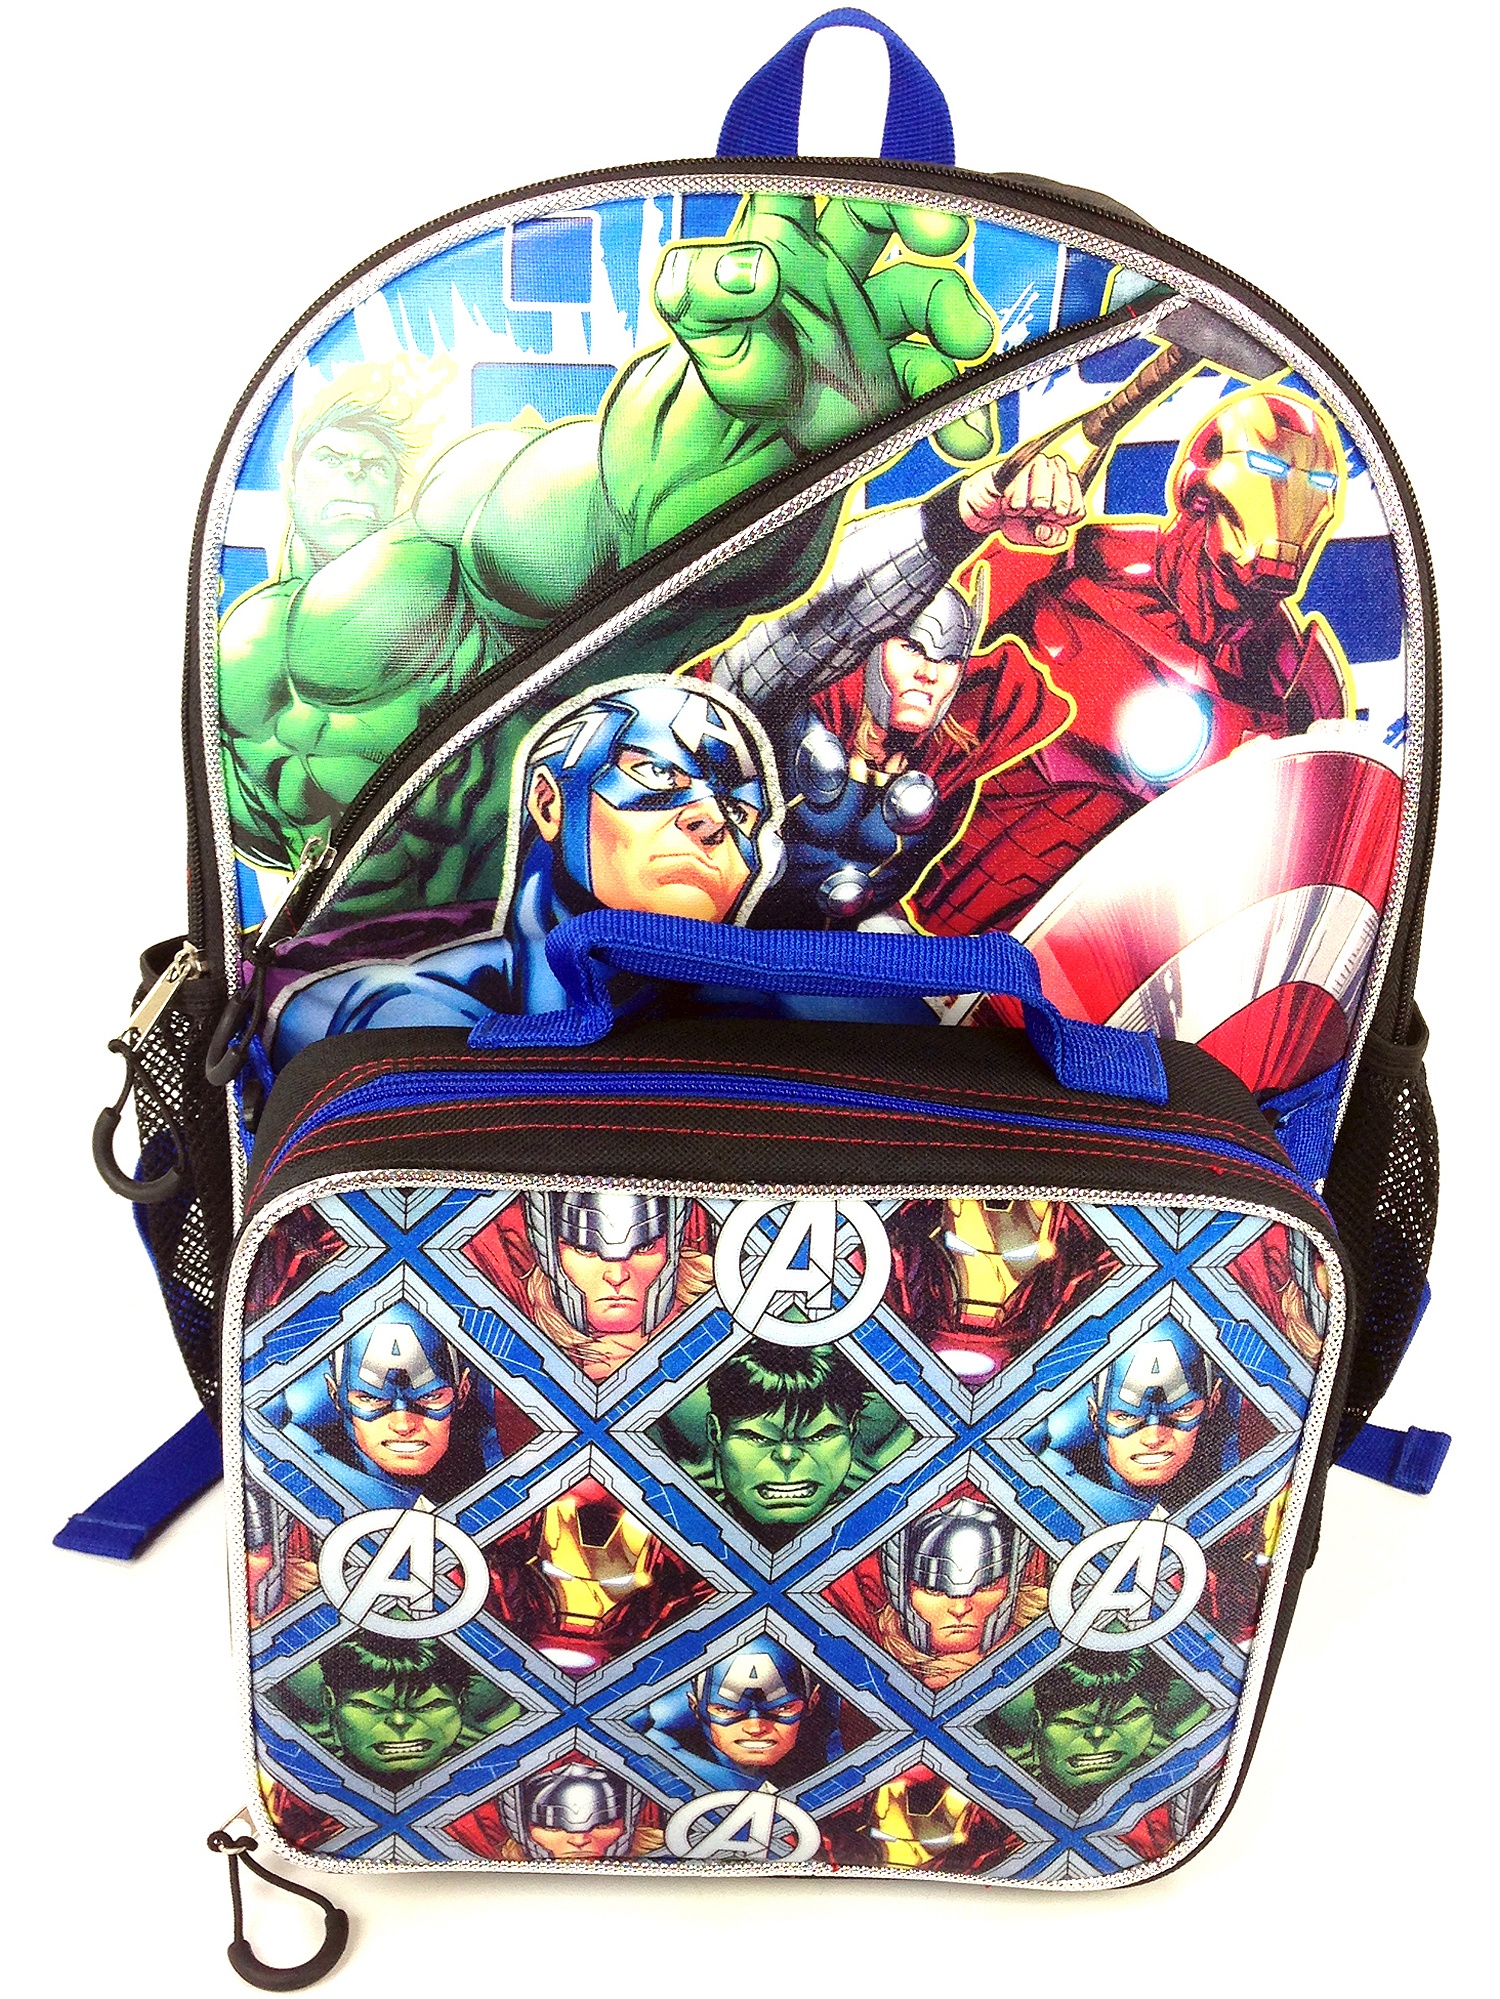 Marvel Avengers 16" Backpacks with Lunch Kit - image 1 of 3